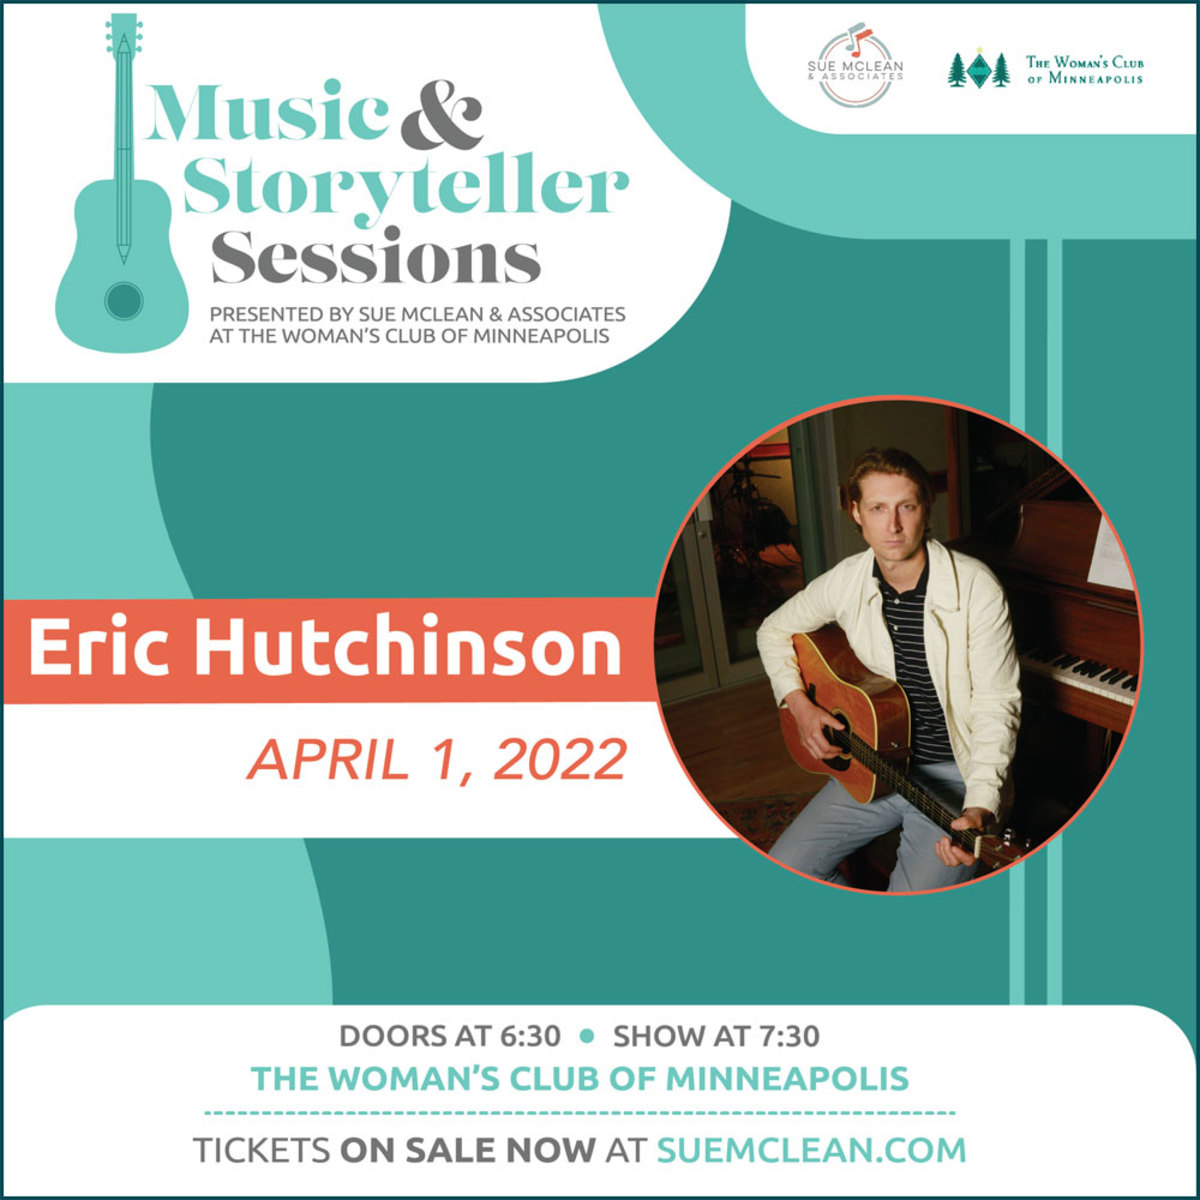 Eric Hutchinson is playing at The Woman's Club of Minneapolis, April 1, 2022